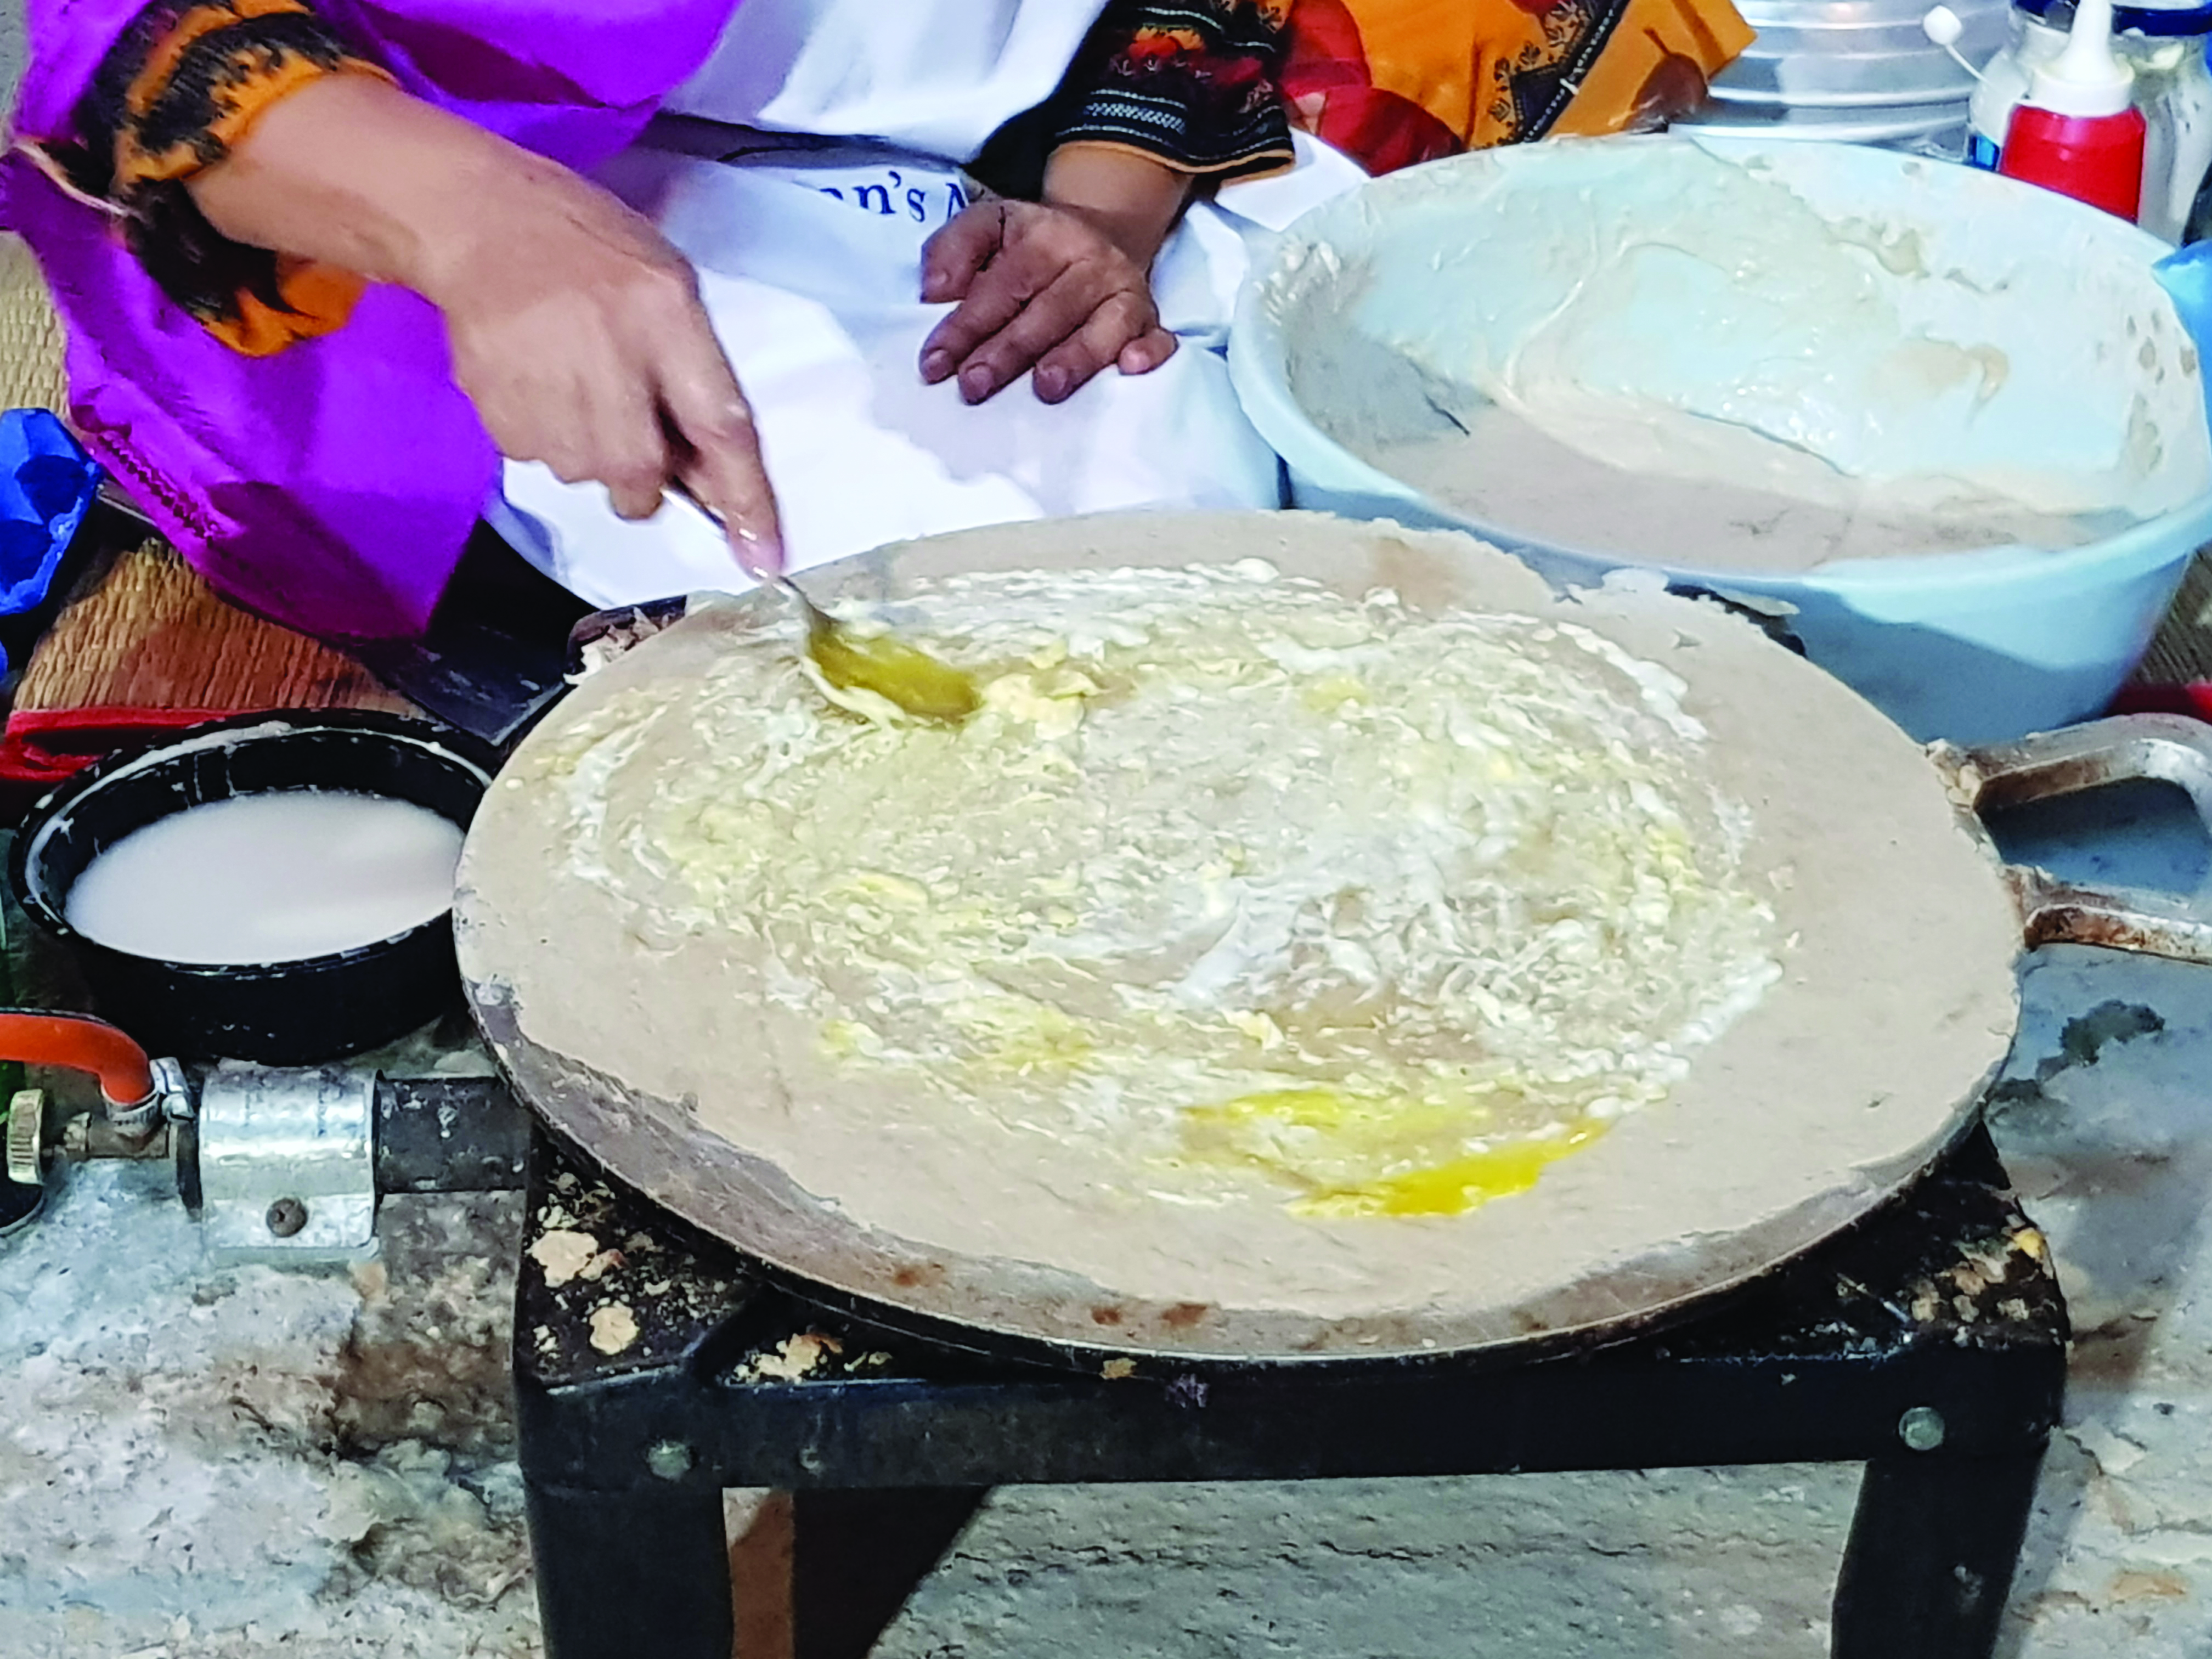 Muscat Festival: Omani food corner at the Heritage Village attracts visitors